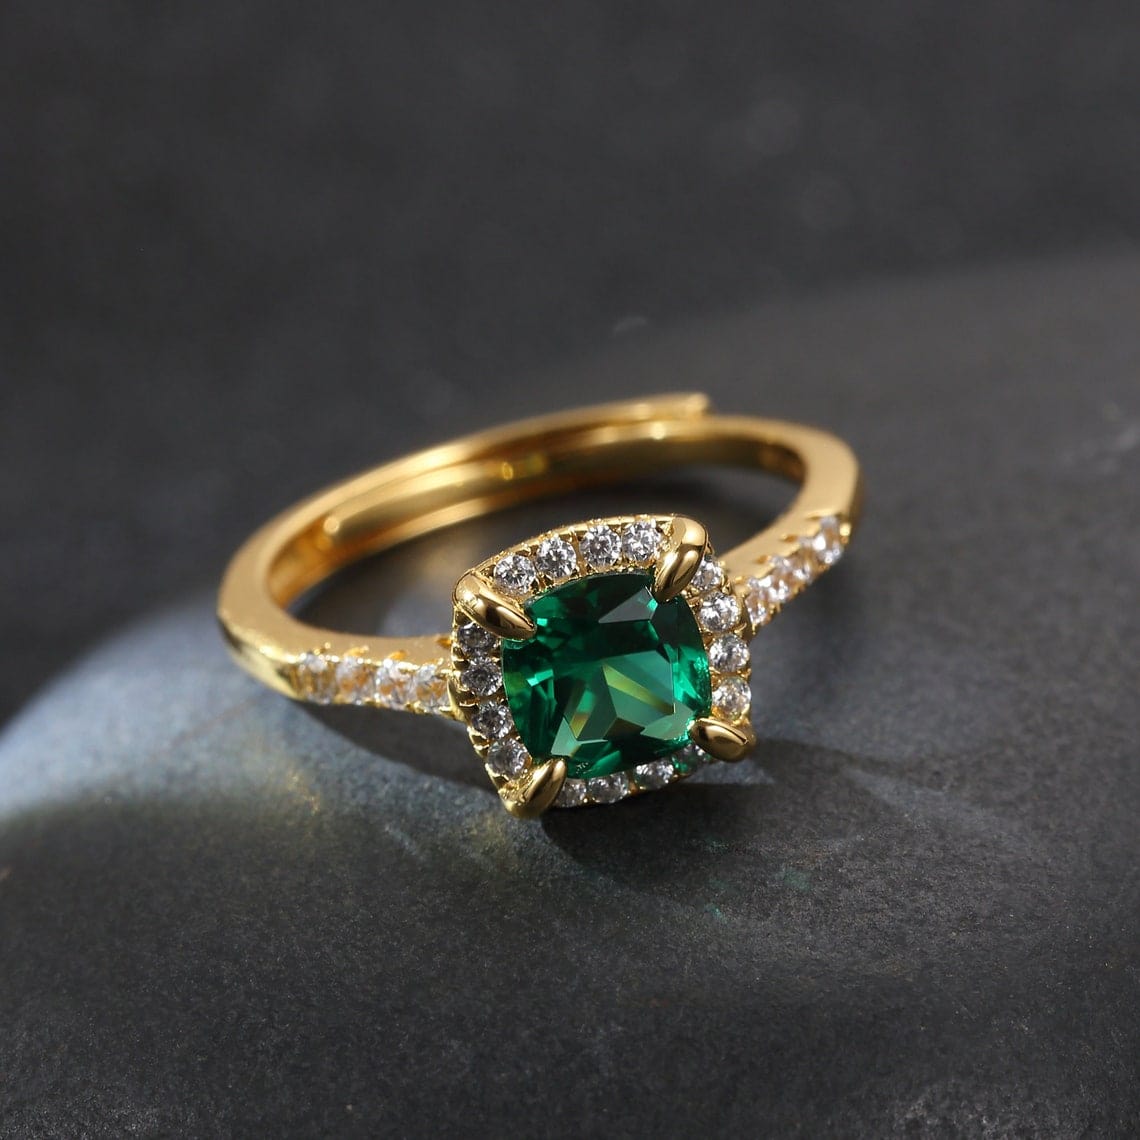 Bieauli Jewellery London emerald ring Emerald Engagement Ring - Vintage Style Statement Ring with May Birthstone